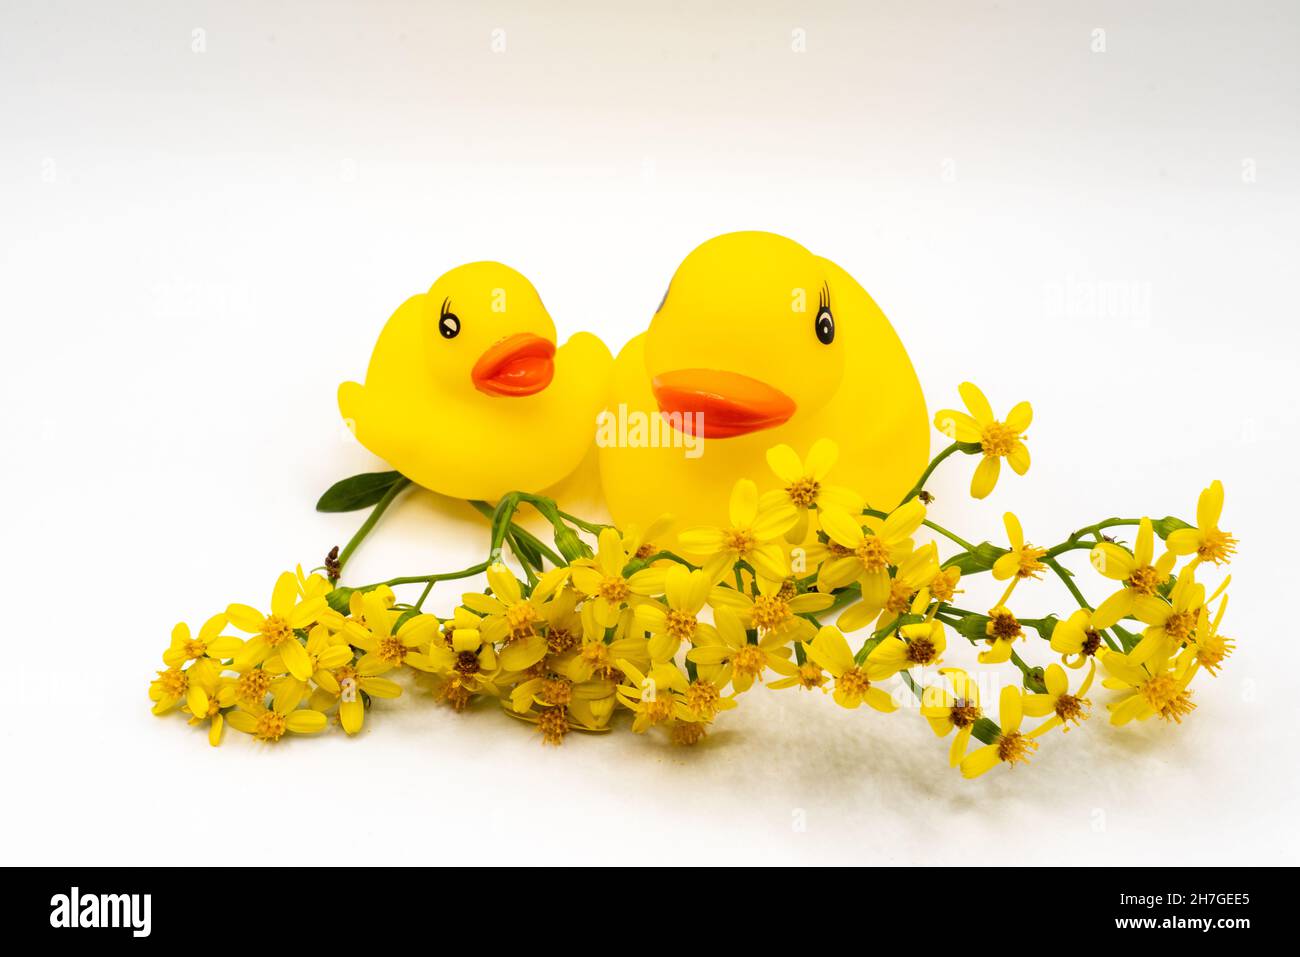 Pair of yellow ducks with red beaks baby bath toy and yellow flowers isolated on white background Stock Photo